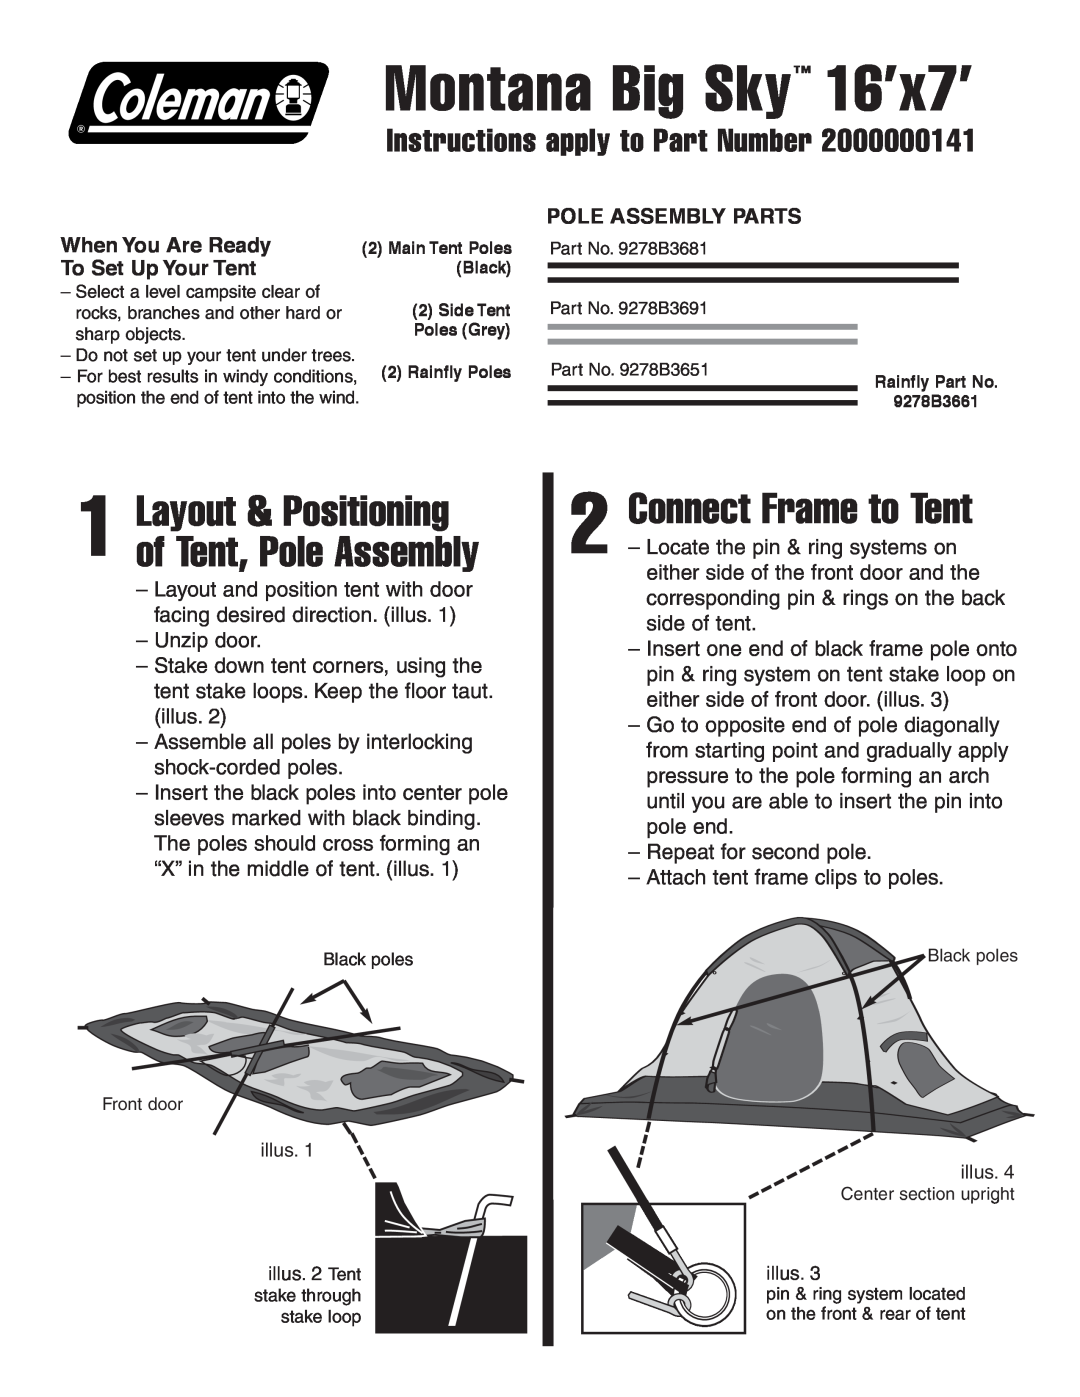 Coleman 16'x7 manual Connect Frame to Tent, When You Are Ready To Set Up Your Tent, Pole Assembly Parts 